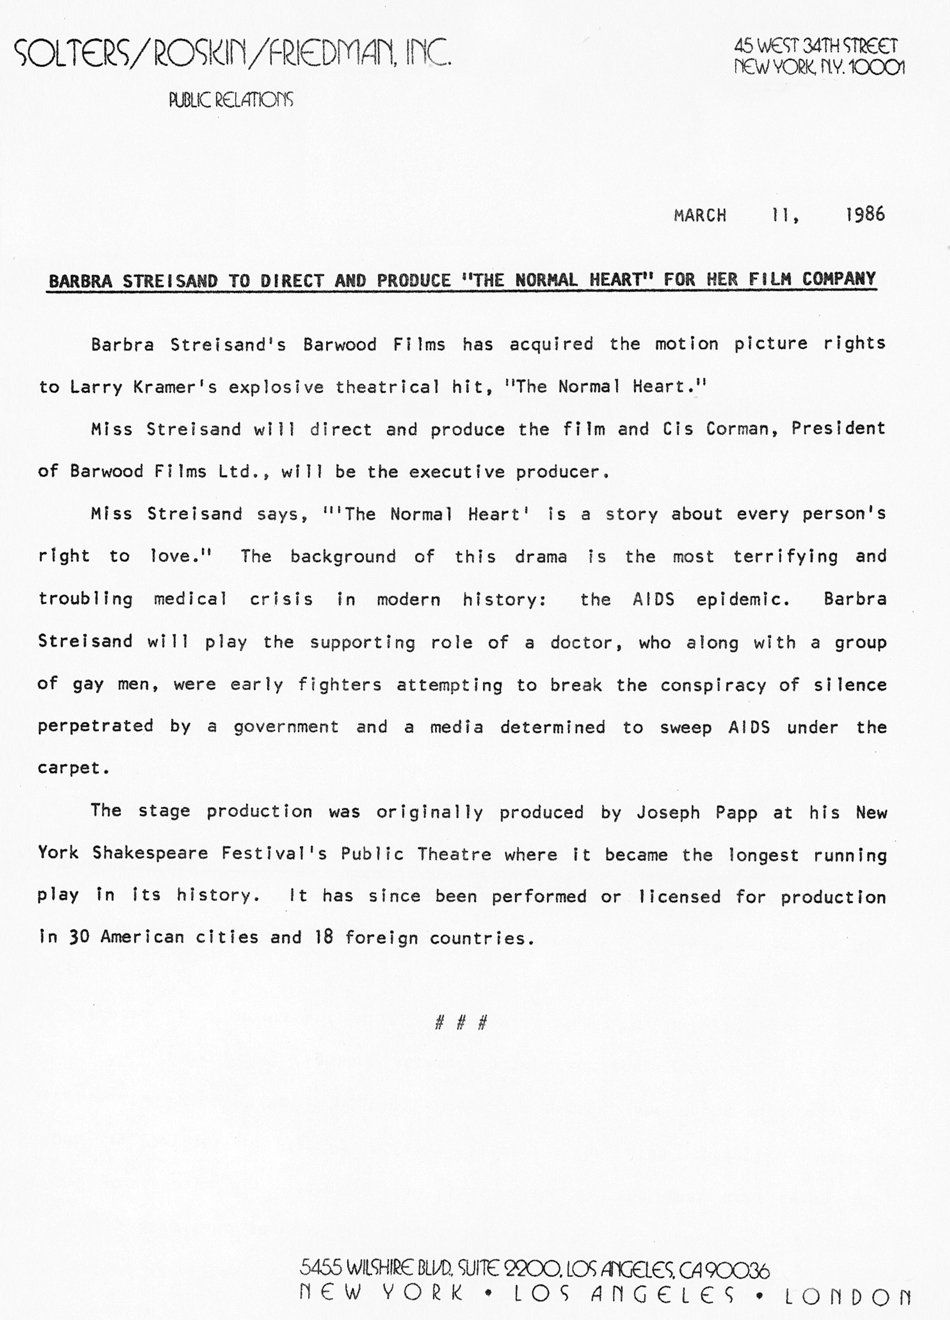 Press release announcing Streisand doing The Normal Heart in 1986